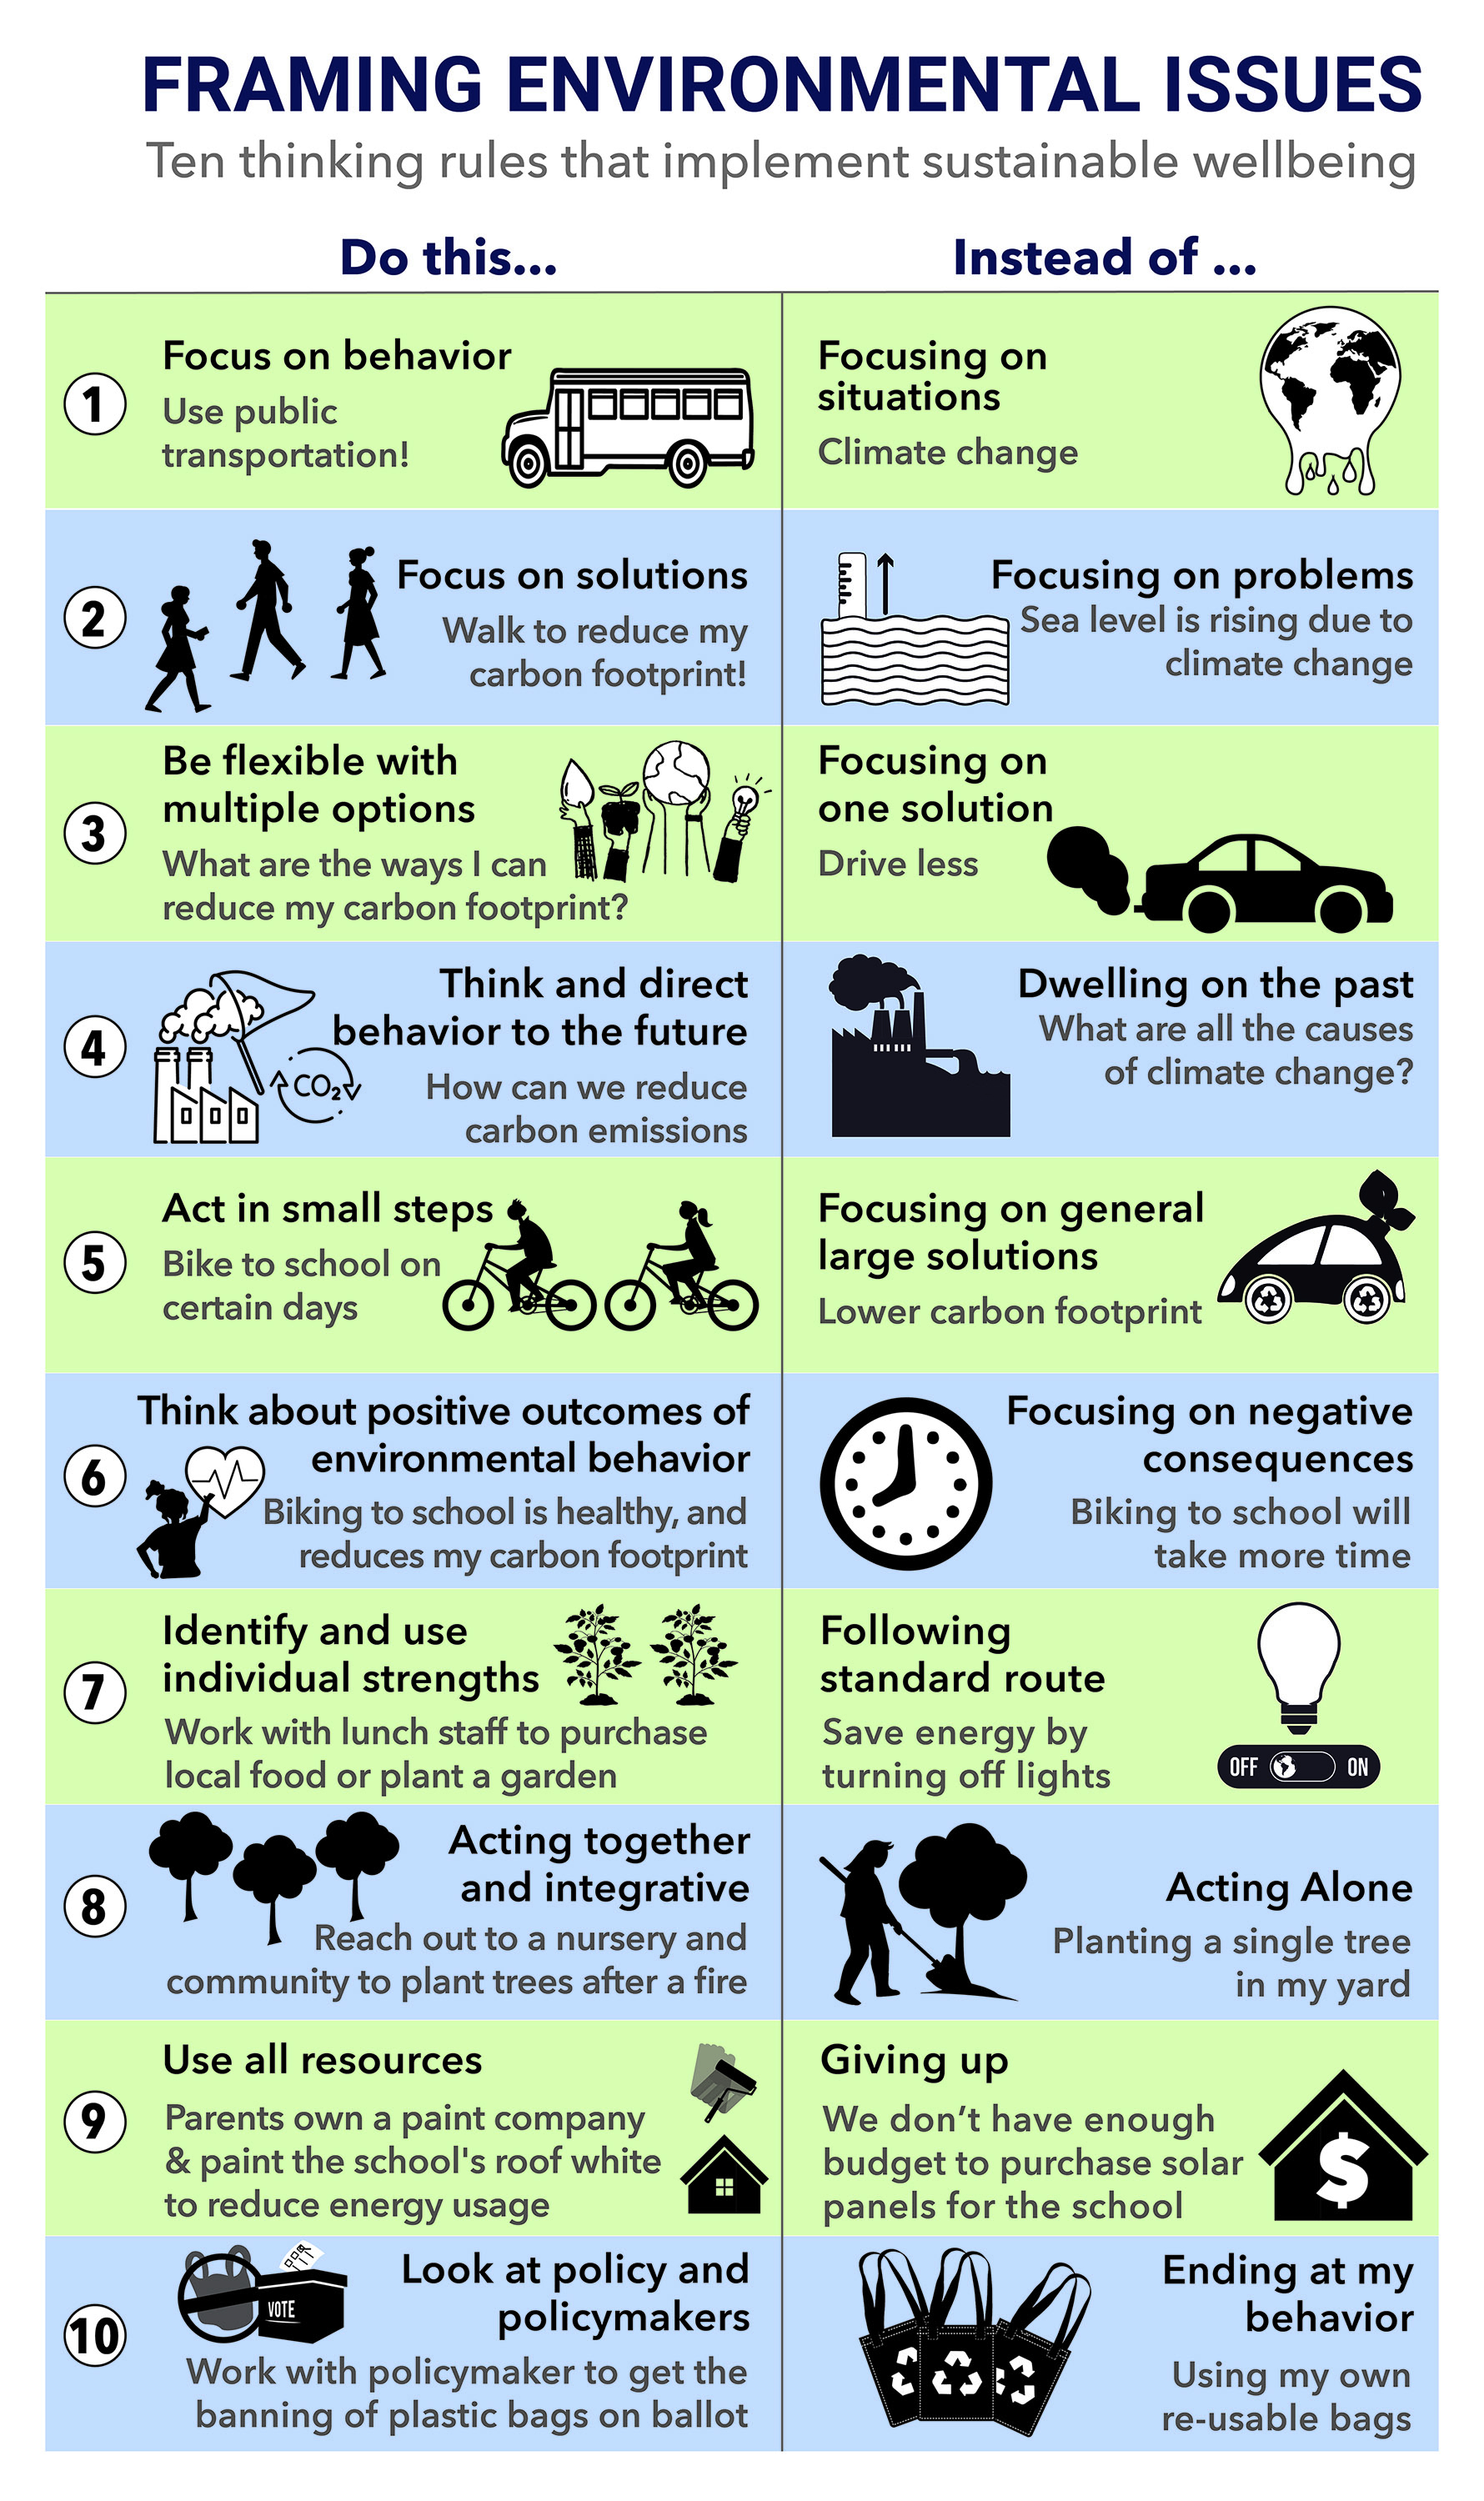 Figure 2. Ten Thinking Rules that implement sustainable wellbeing